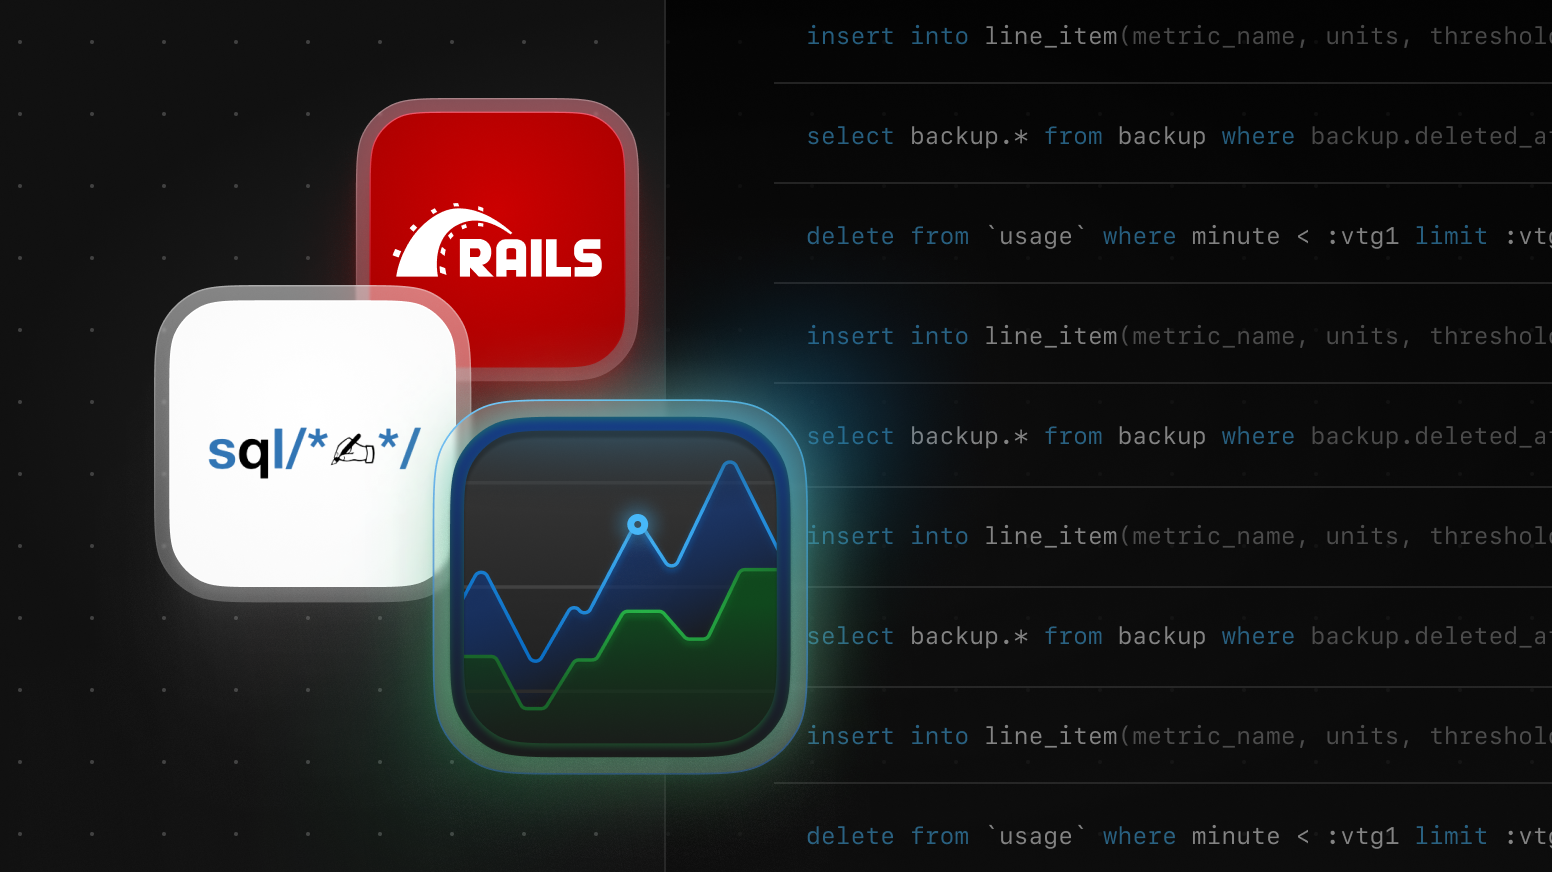 Identifying slow Rails queries with sqlcommenter